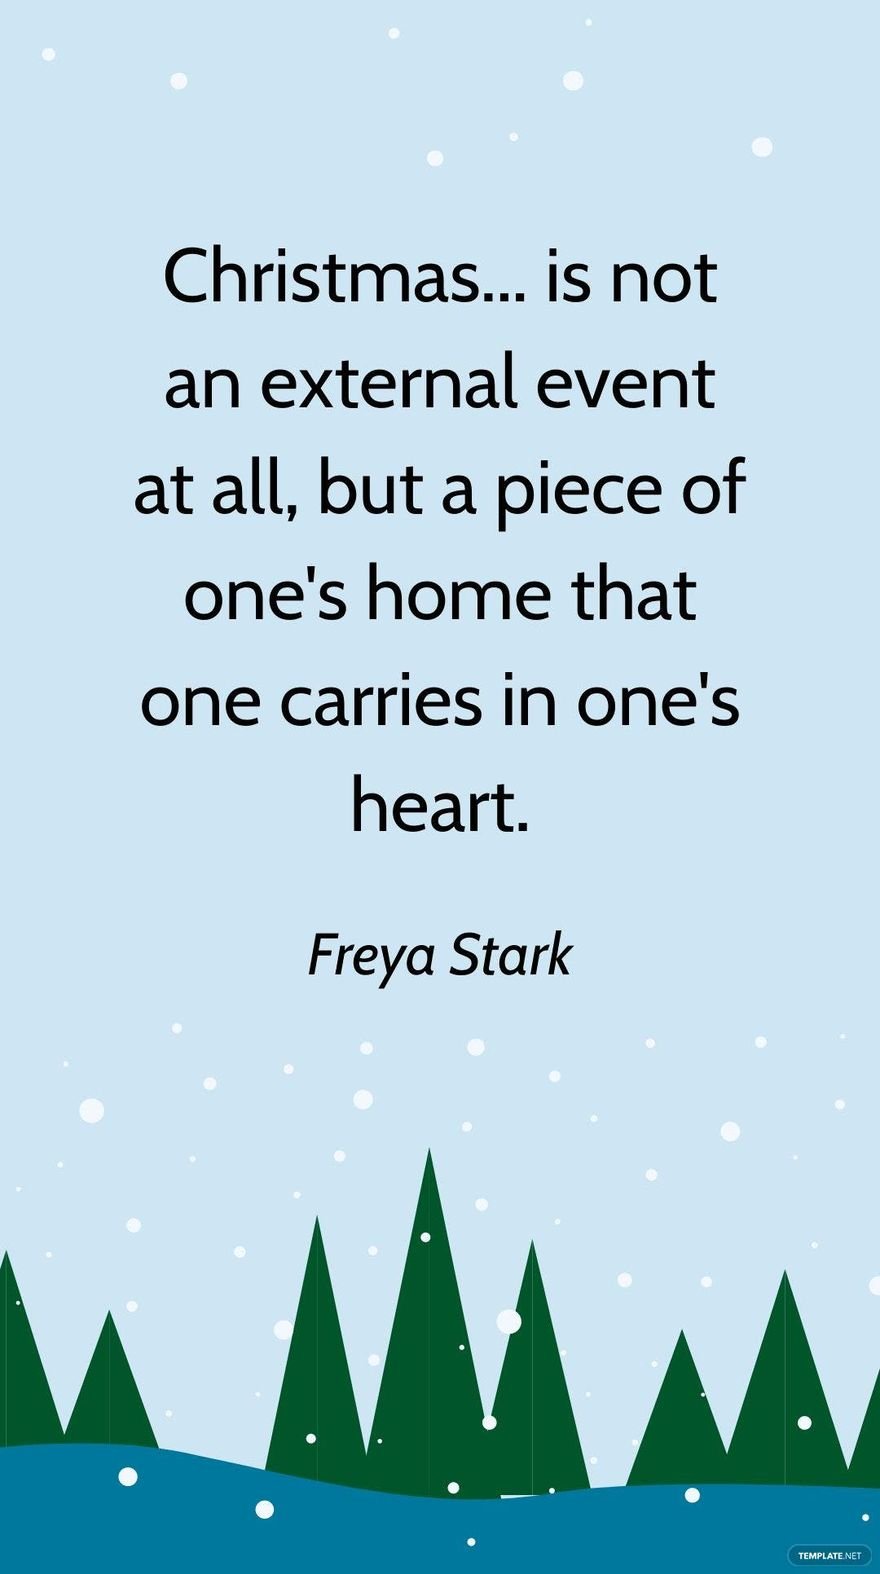 Free Freya Stark - Christmas... is not an external event at all, but a piece of one's home that one carries in one's heart.